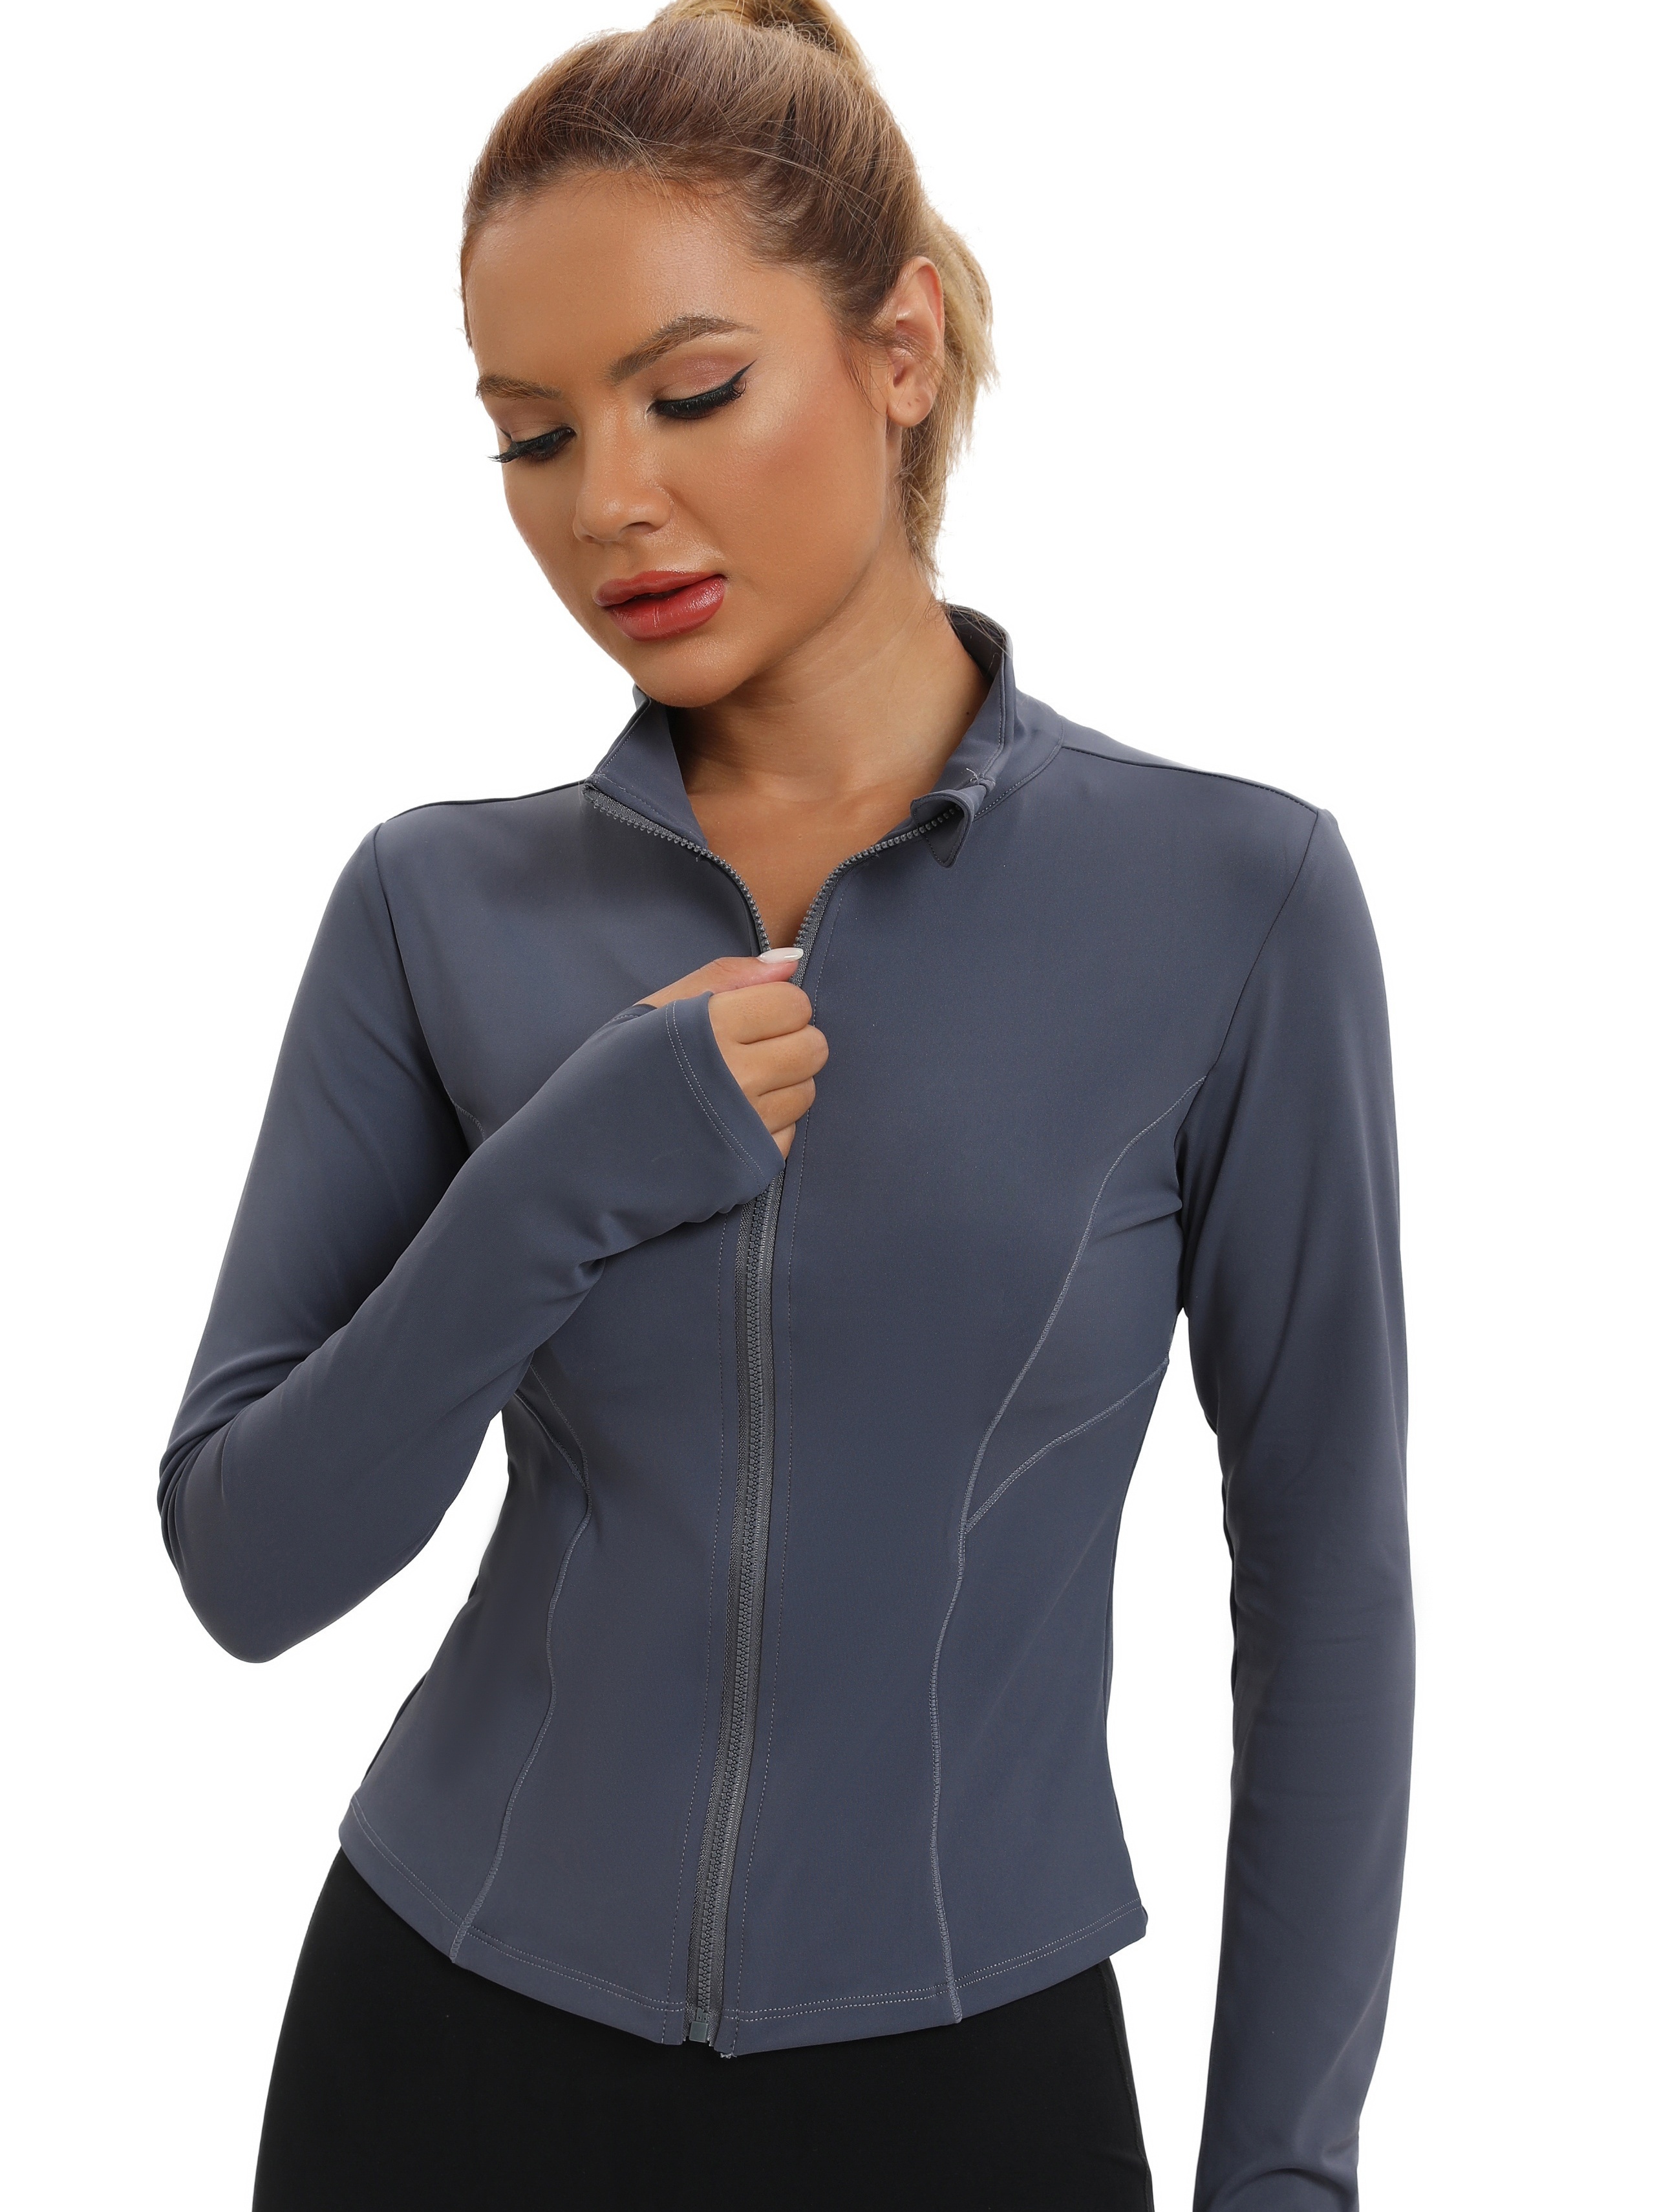 Women's Solid Color Long Sleeve Athletic Top With Thumb Hole, Full Zip Up  Crop Jacket For Yoga Running Fitness Gym, Women's Activewear